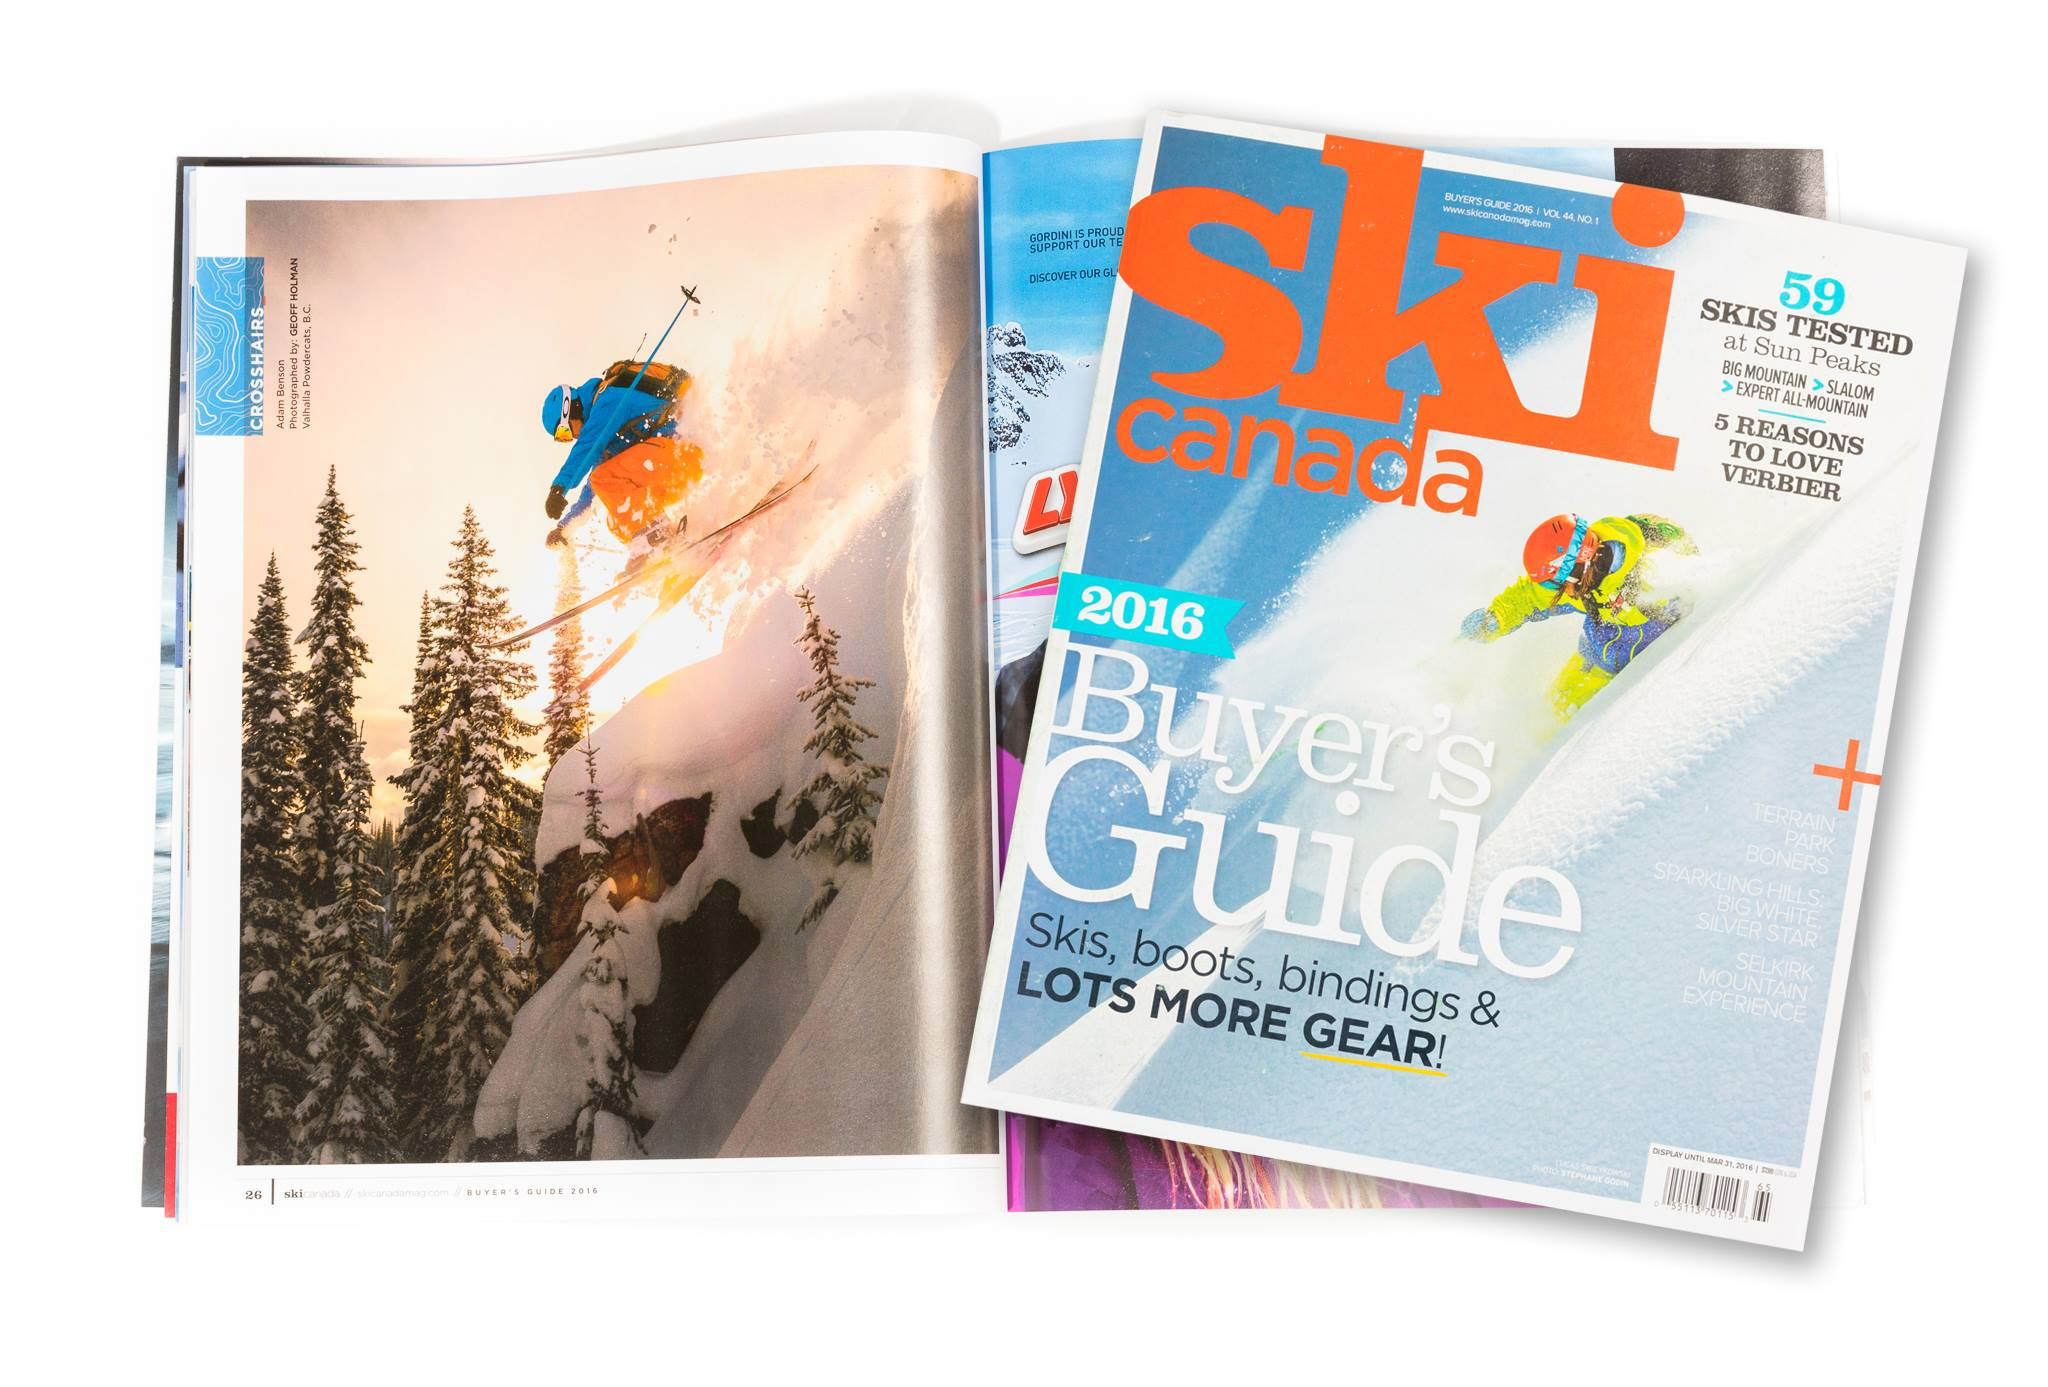 Catskiing Canada featured in the Ski Canada Buyers Guide Gallery